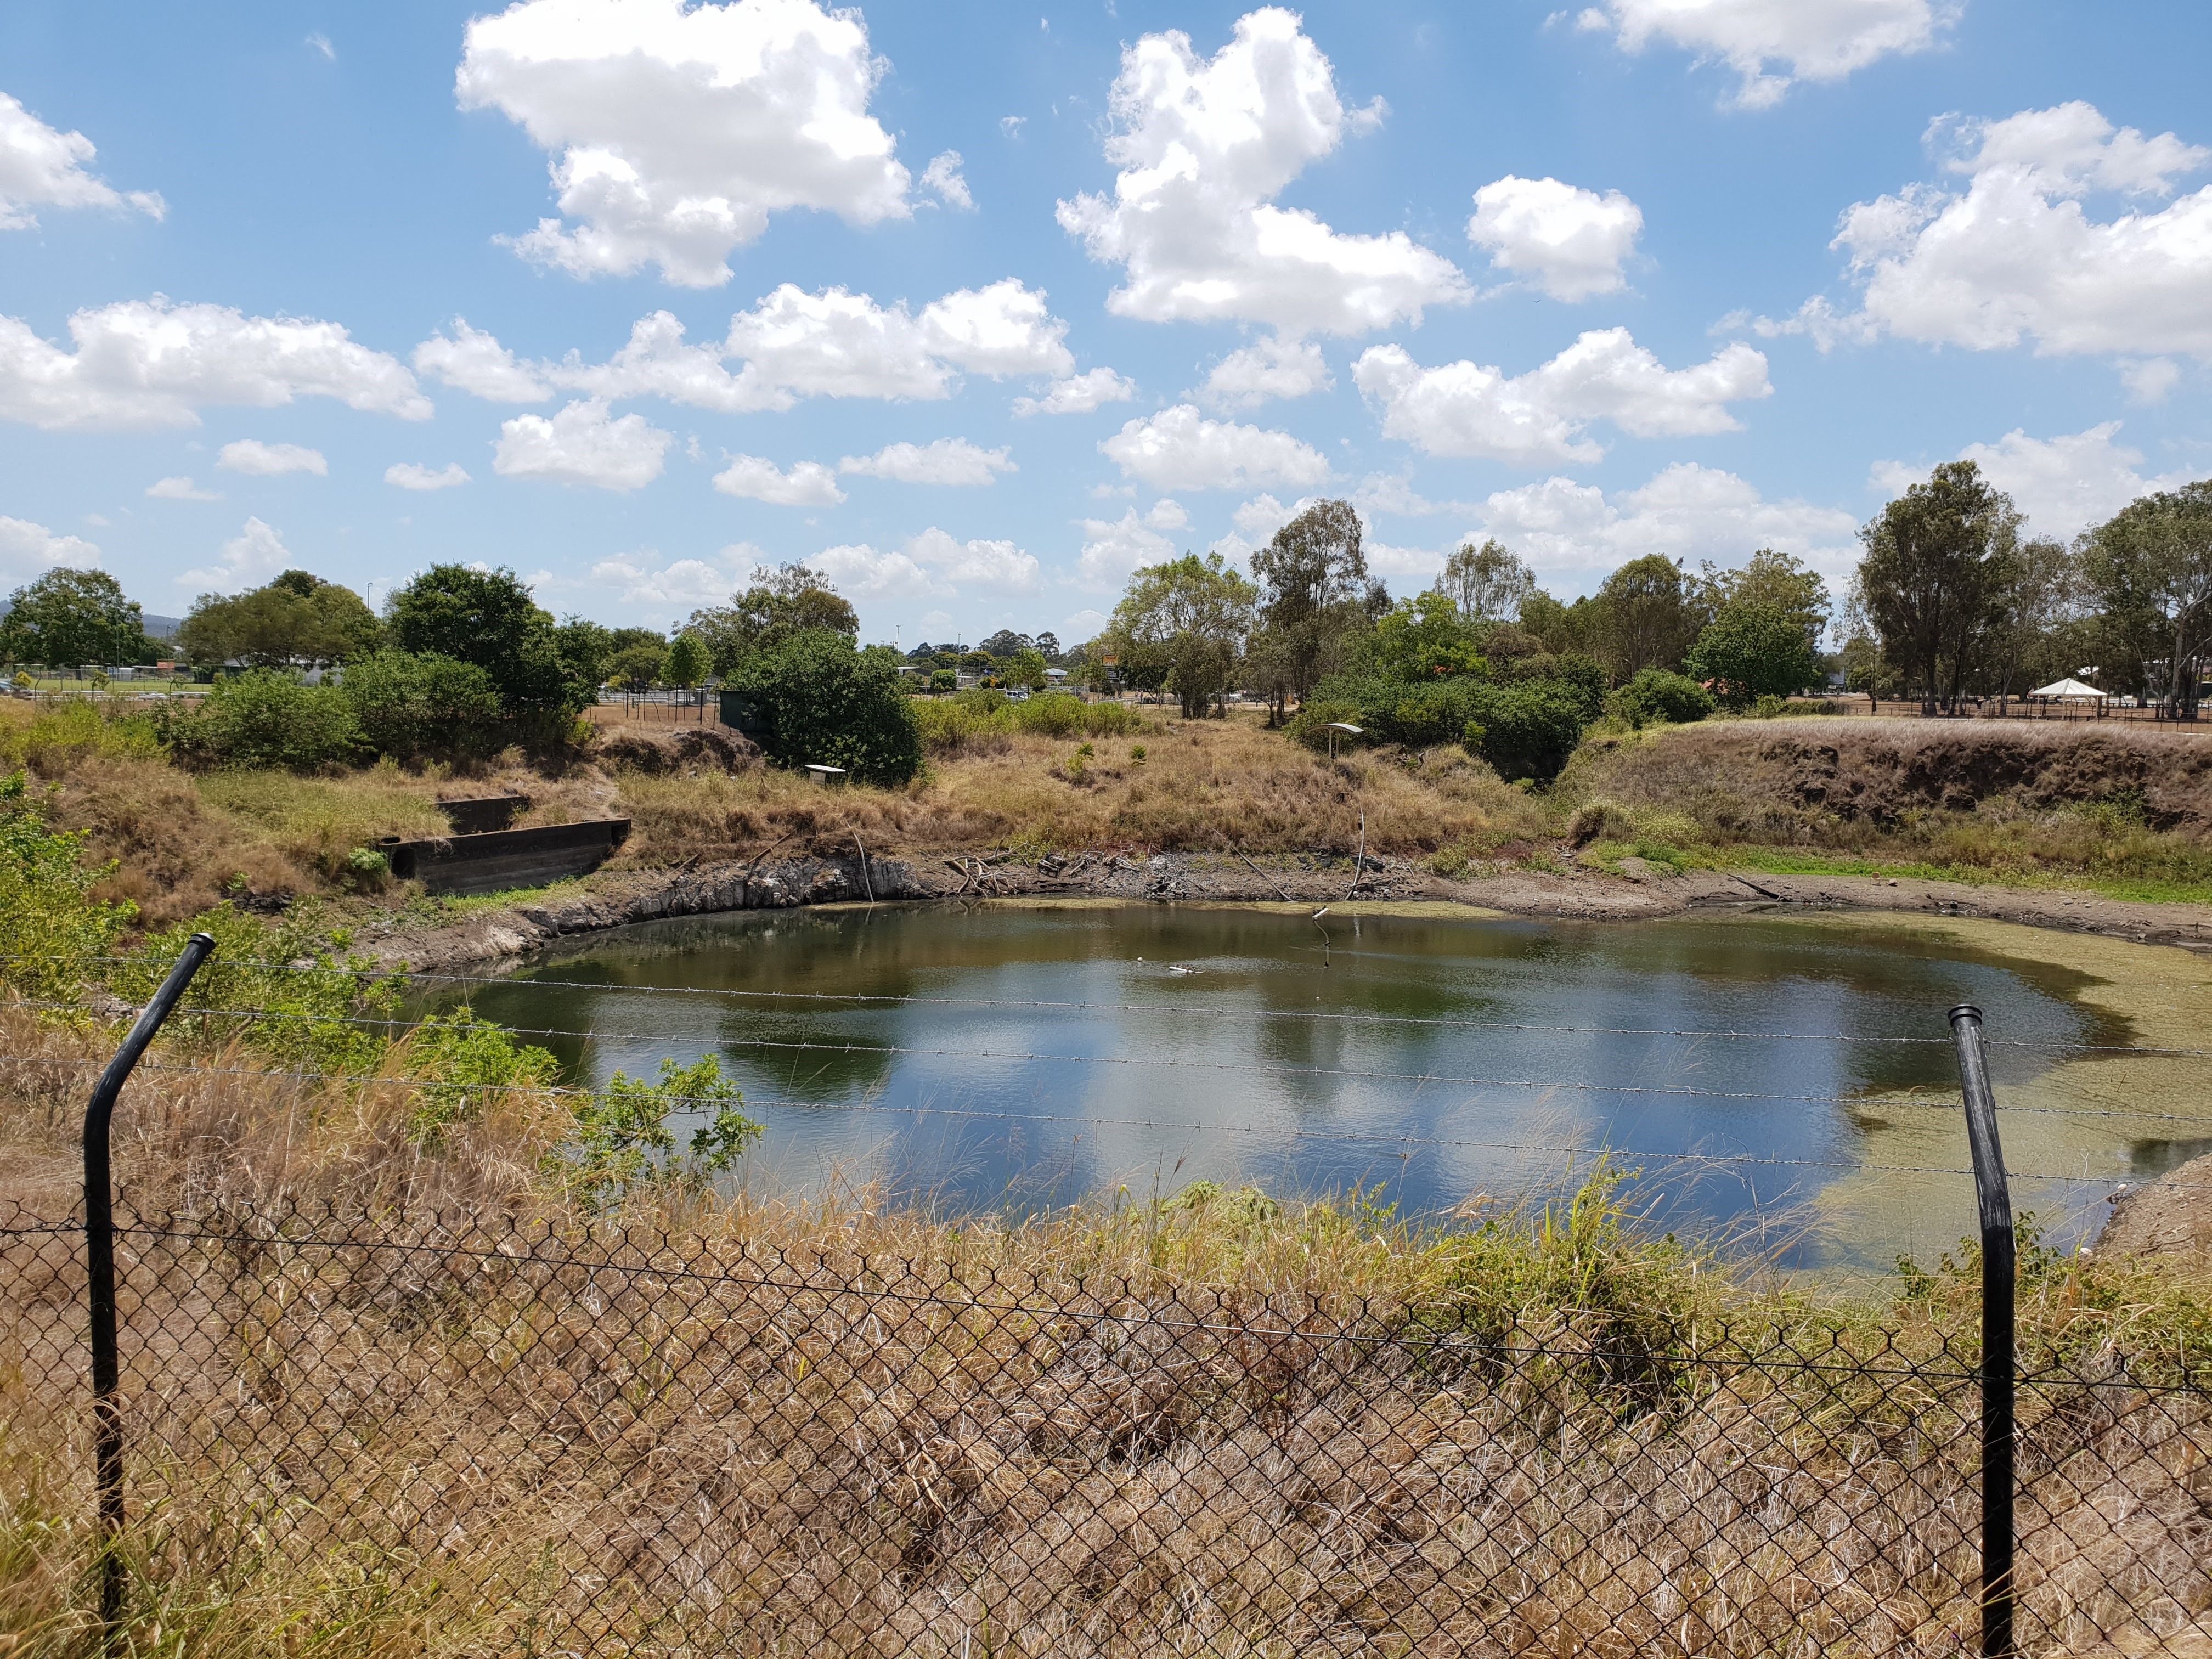 This is an image of the local heritage place known as Acacia Ridge Air Raid Shelter - viewed within the context of it's location within Carr's Quarry. Photograph taken 28 January 2019.